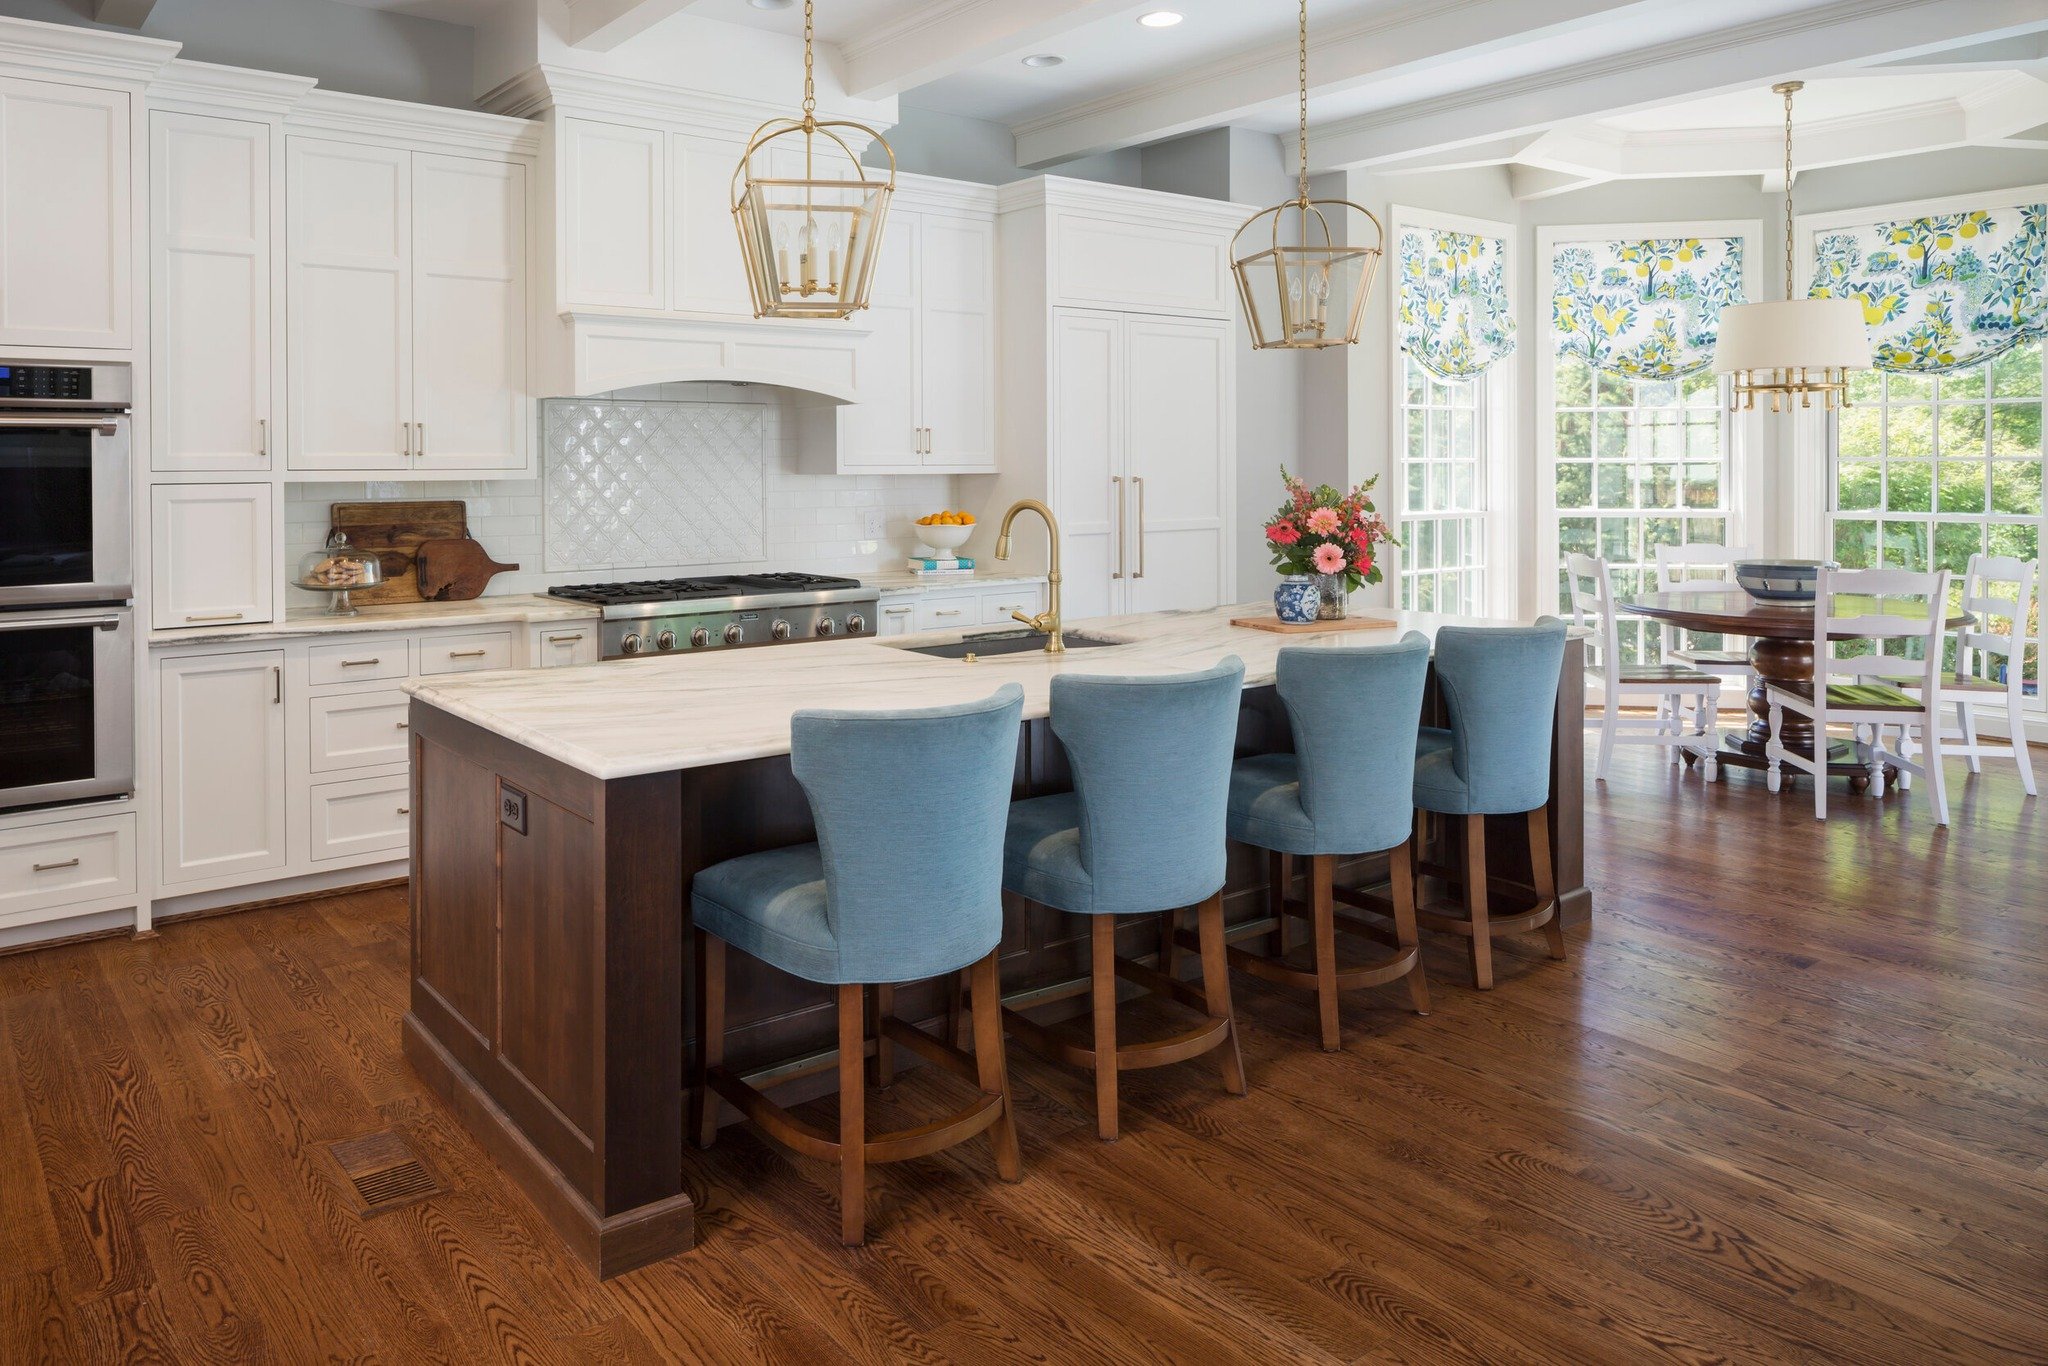 Traditional with a modern twist&ndash; bespoke redesign featuring classic white shaker-style cabinets, sumptuous blue counter stools, and the warm glow of @visualcomfort pendants! This kitchen is, by far, one of our favorites. #KitchenGoals

#interio